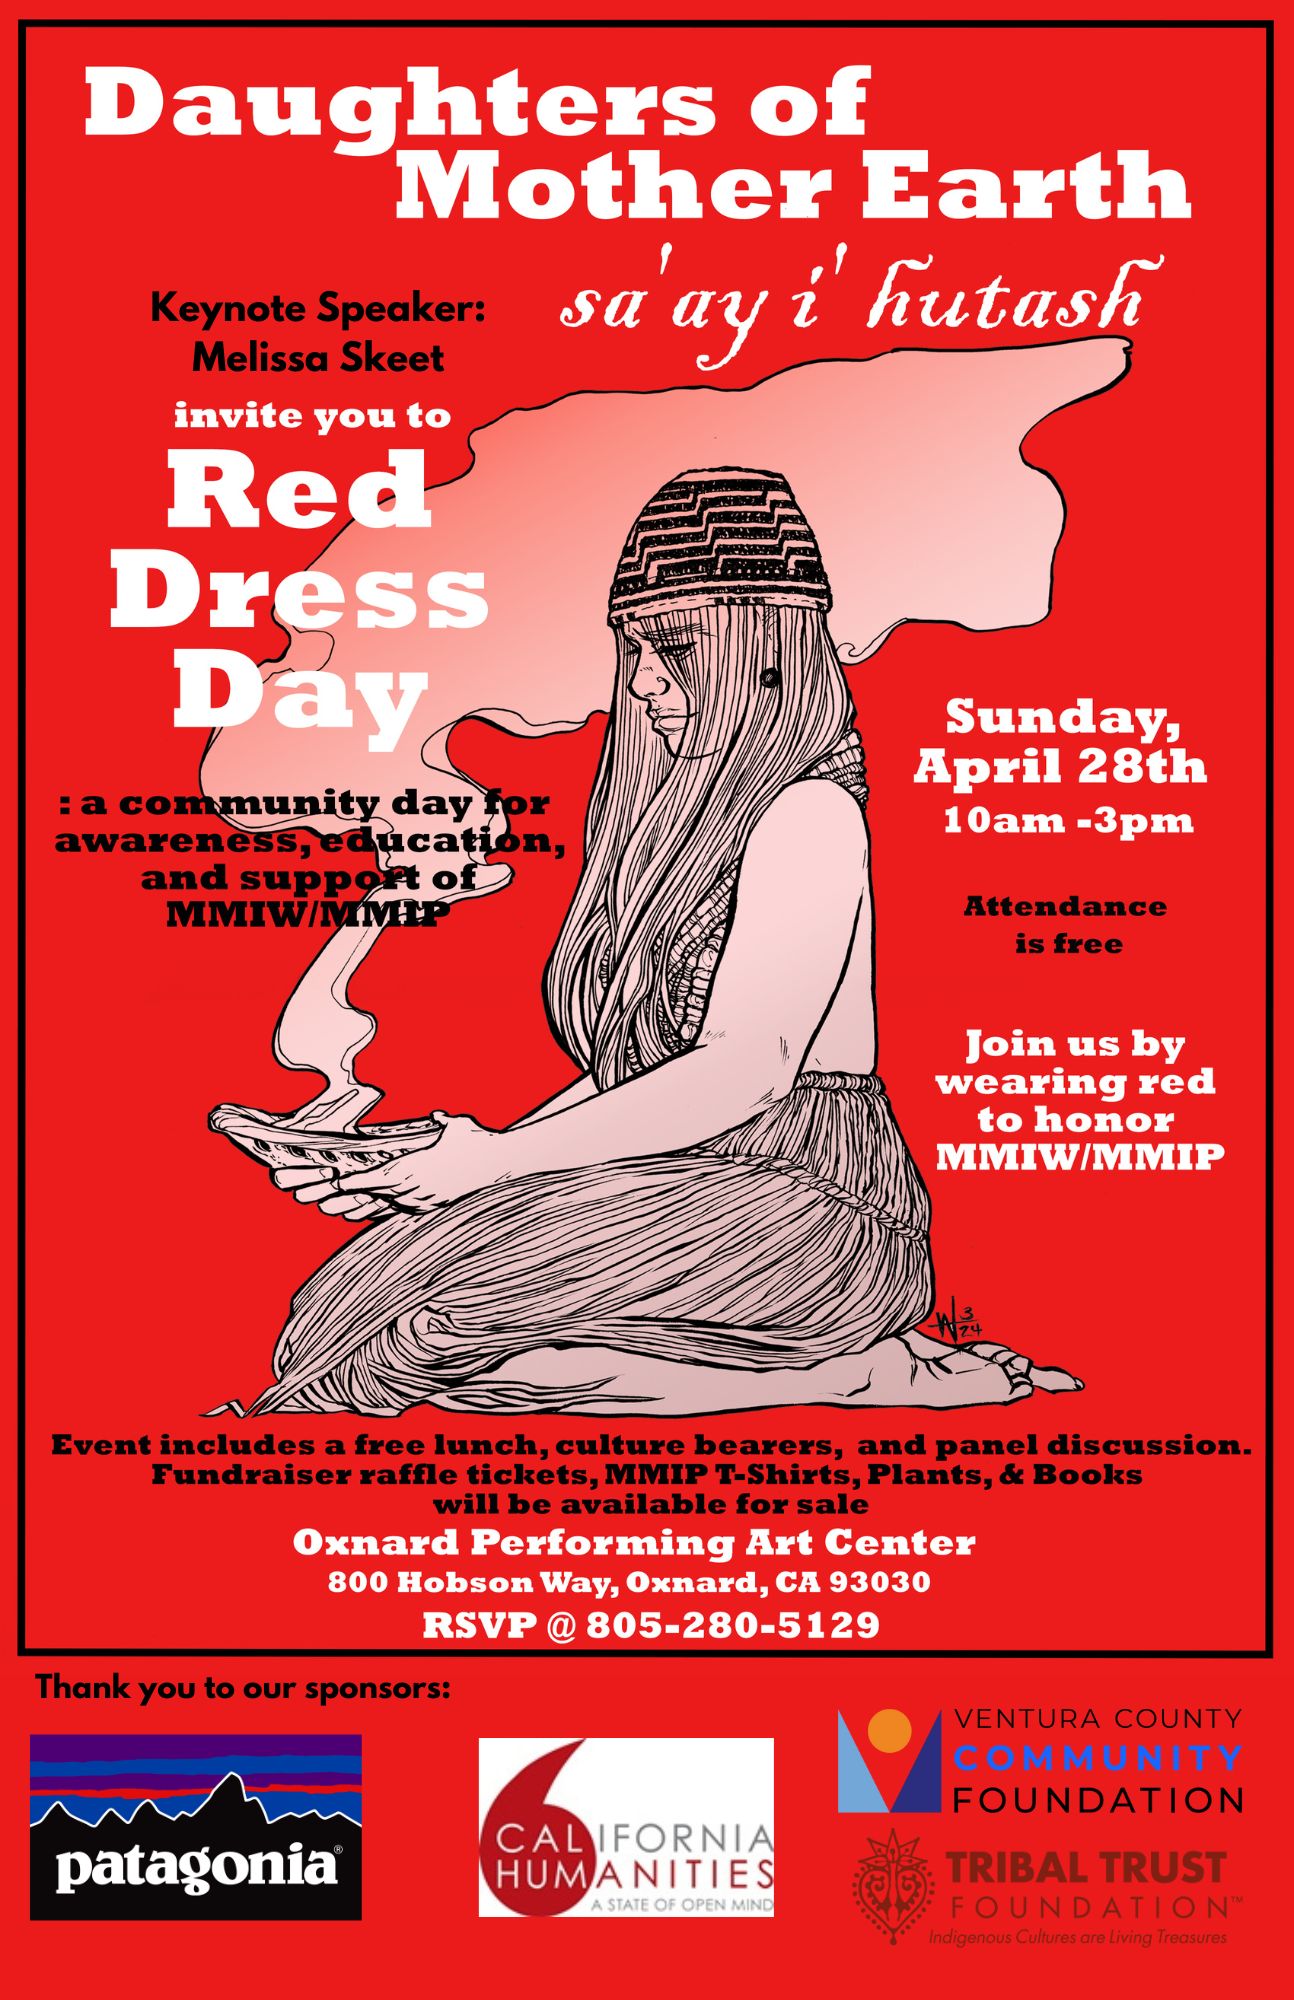 Poster showing a graphic of woman kneeling on the ground with smoke coming from a vessel in her hands. Promotion for Red Dress Day event